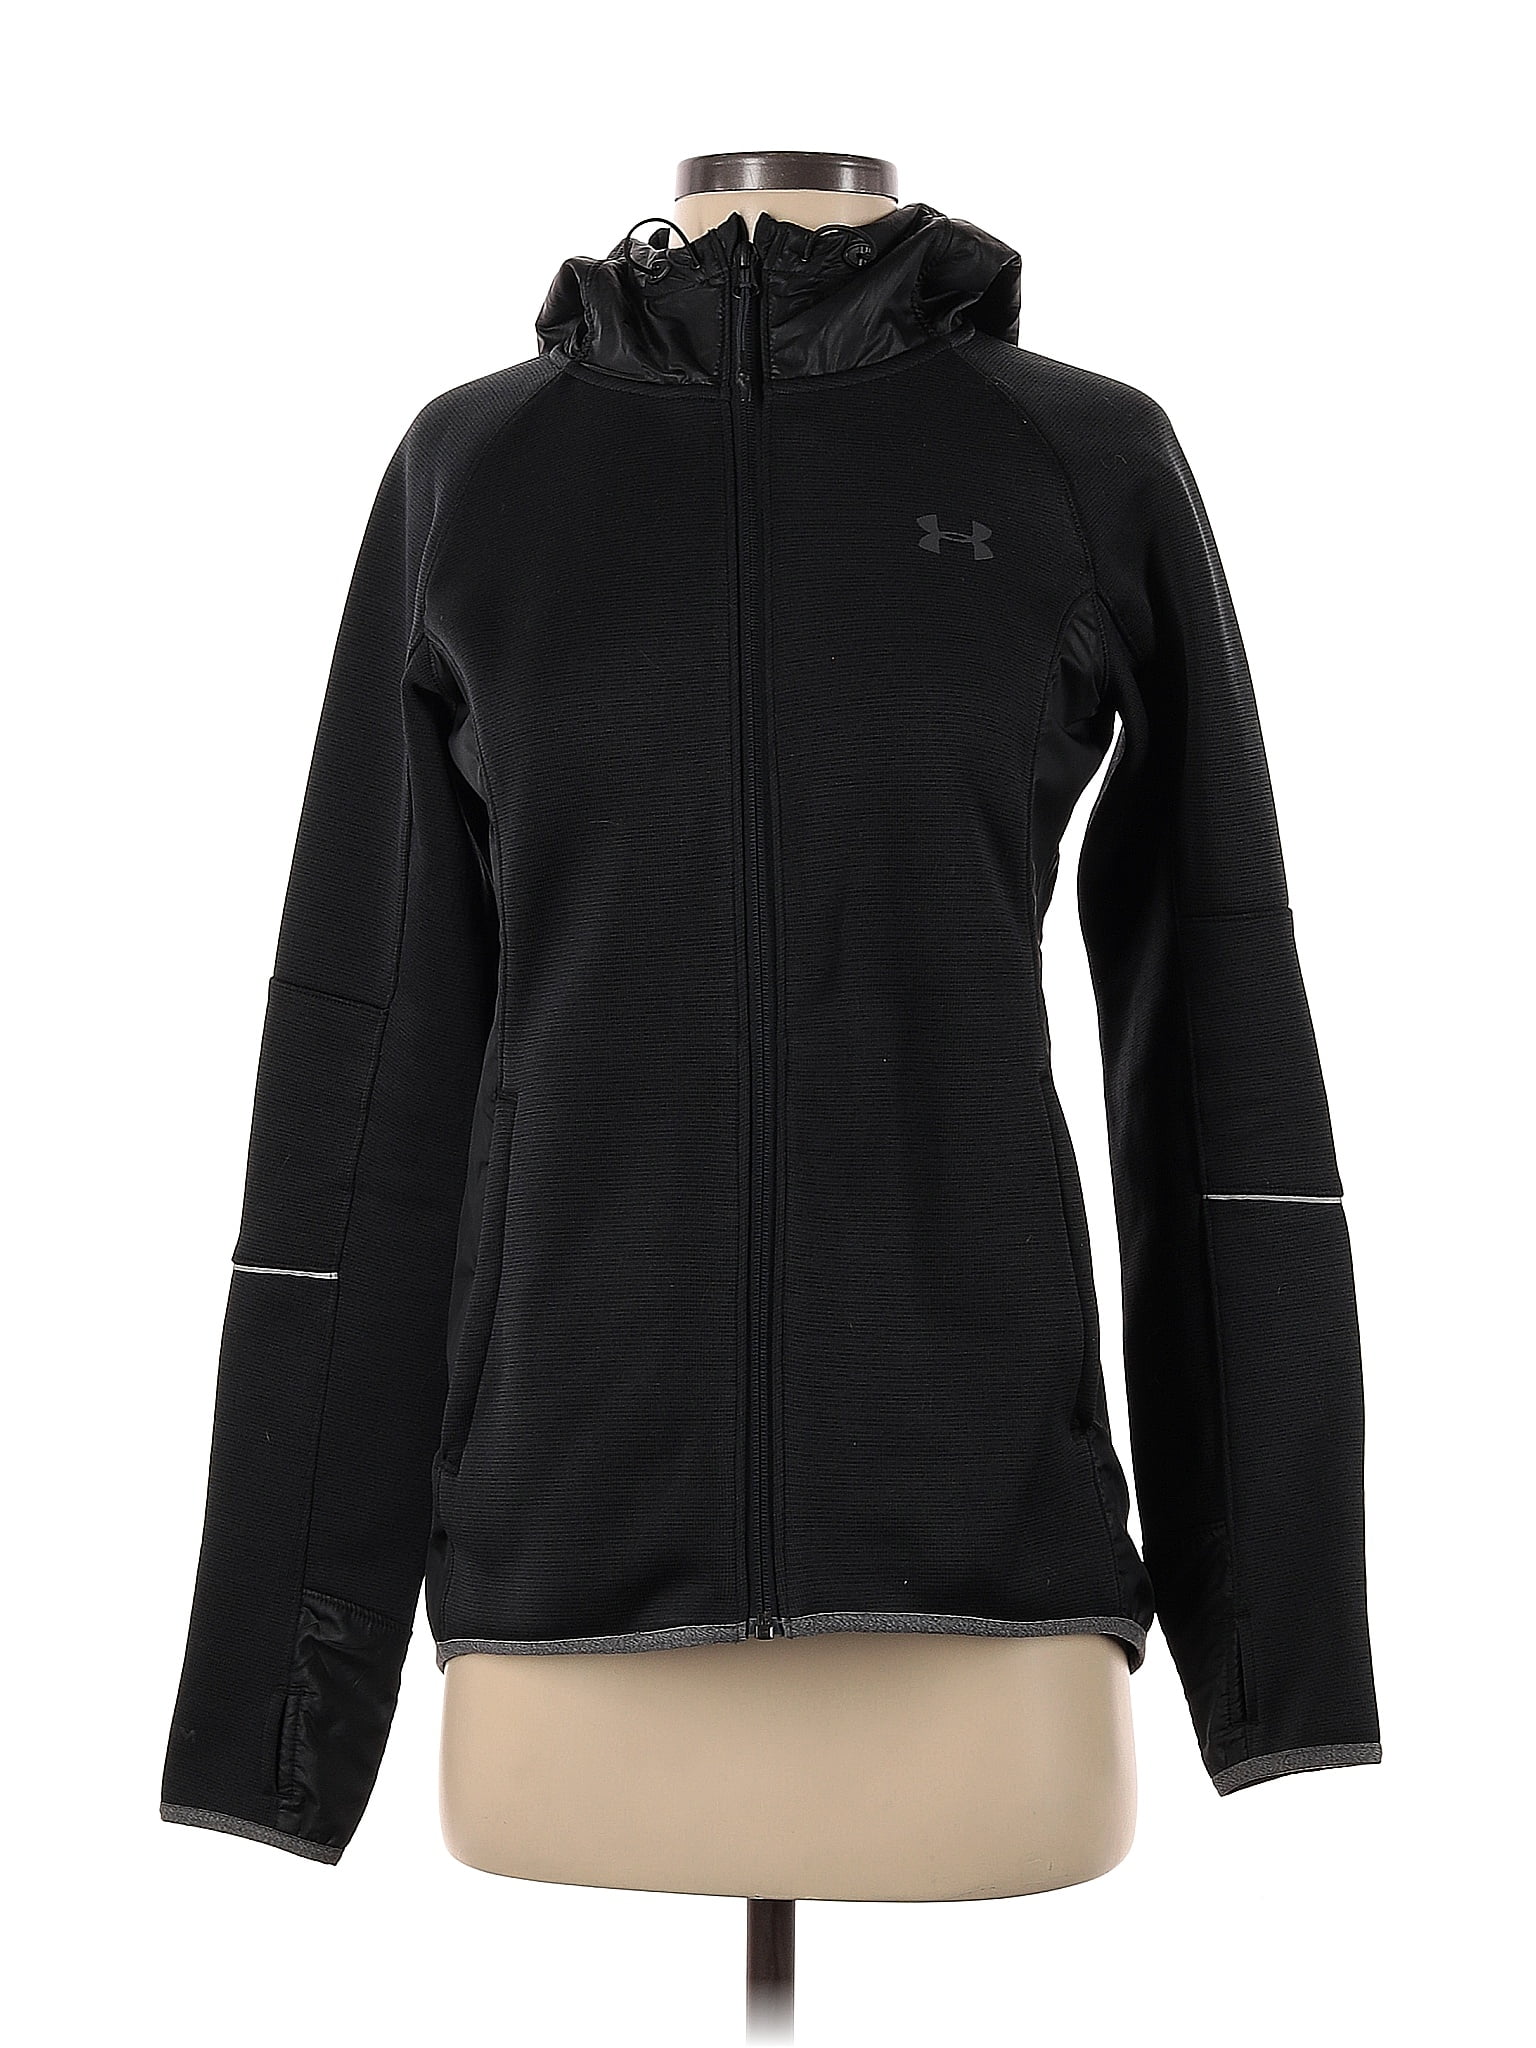 Under Armour Solid Black Track Jacket Size XS - 56% off | thredUP